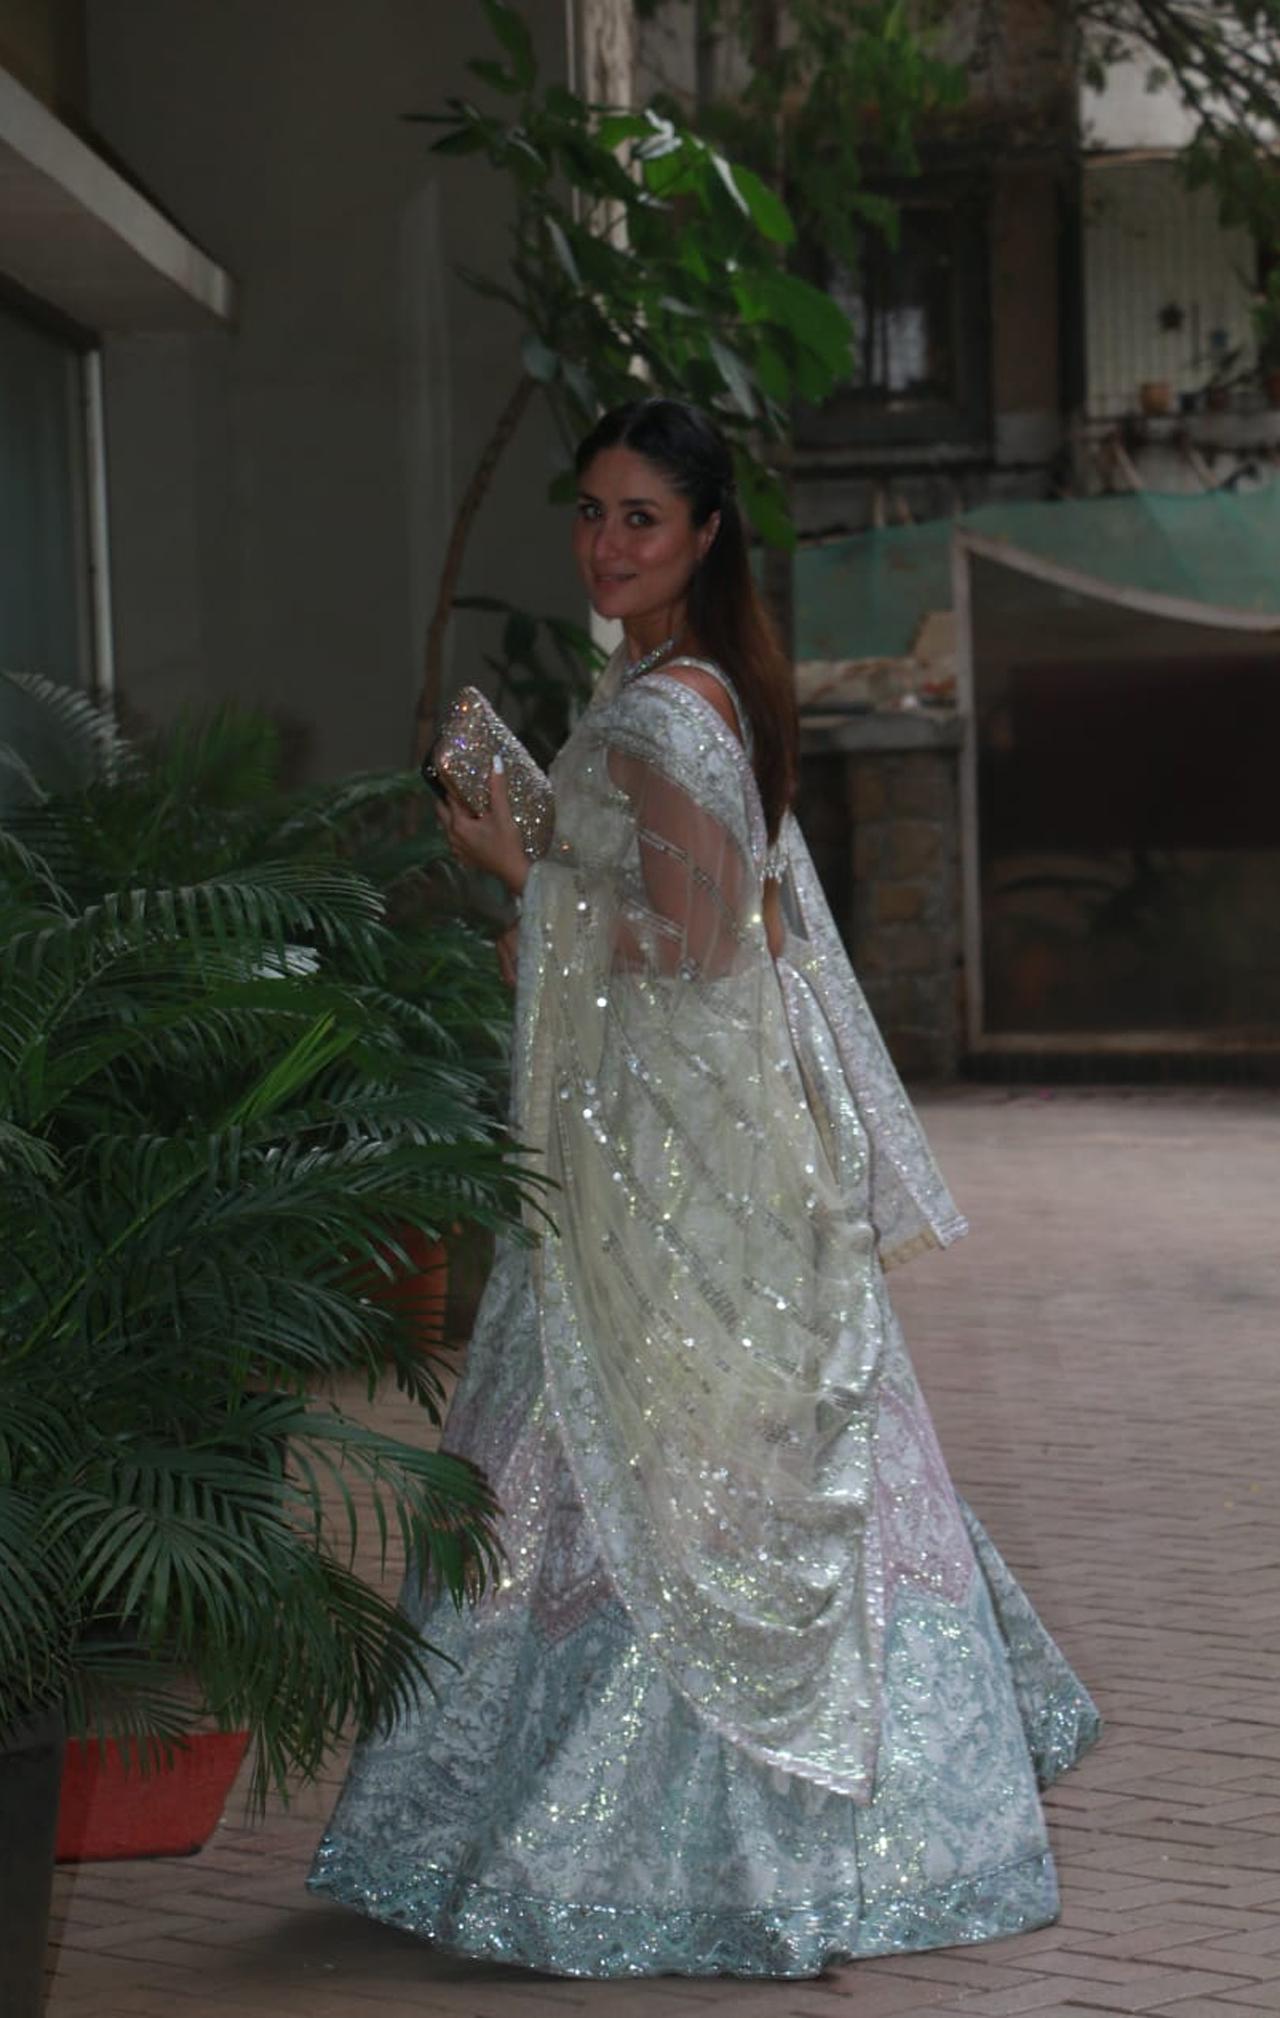 Kareena Kapoor Khan slayed with her silver lehenga as she too got clicked outside Ranbir Kapoor's home. She smiled away at the paparazzi and as always, looked radiant.